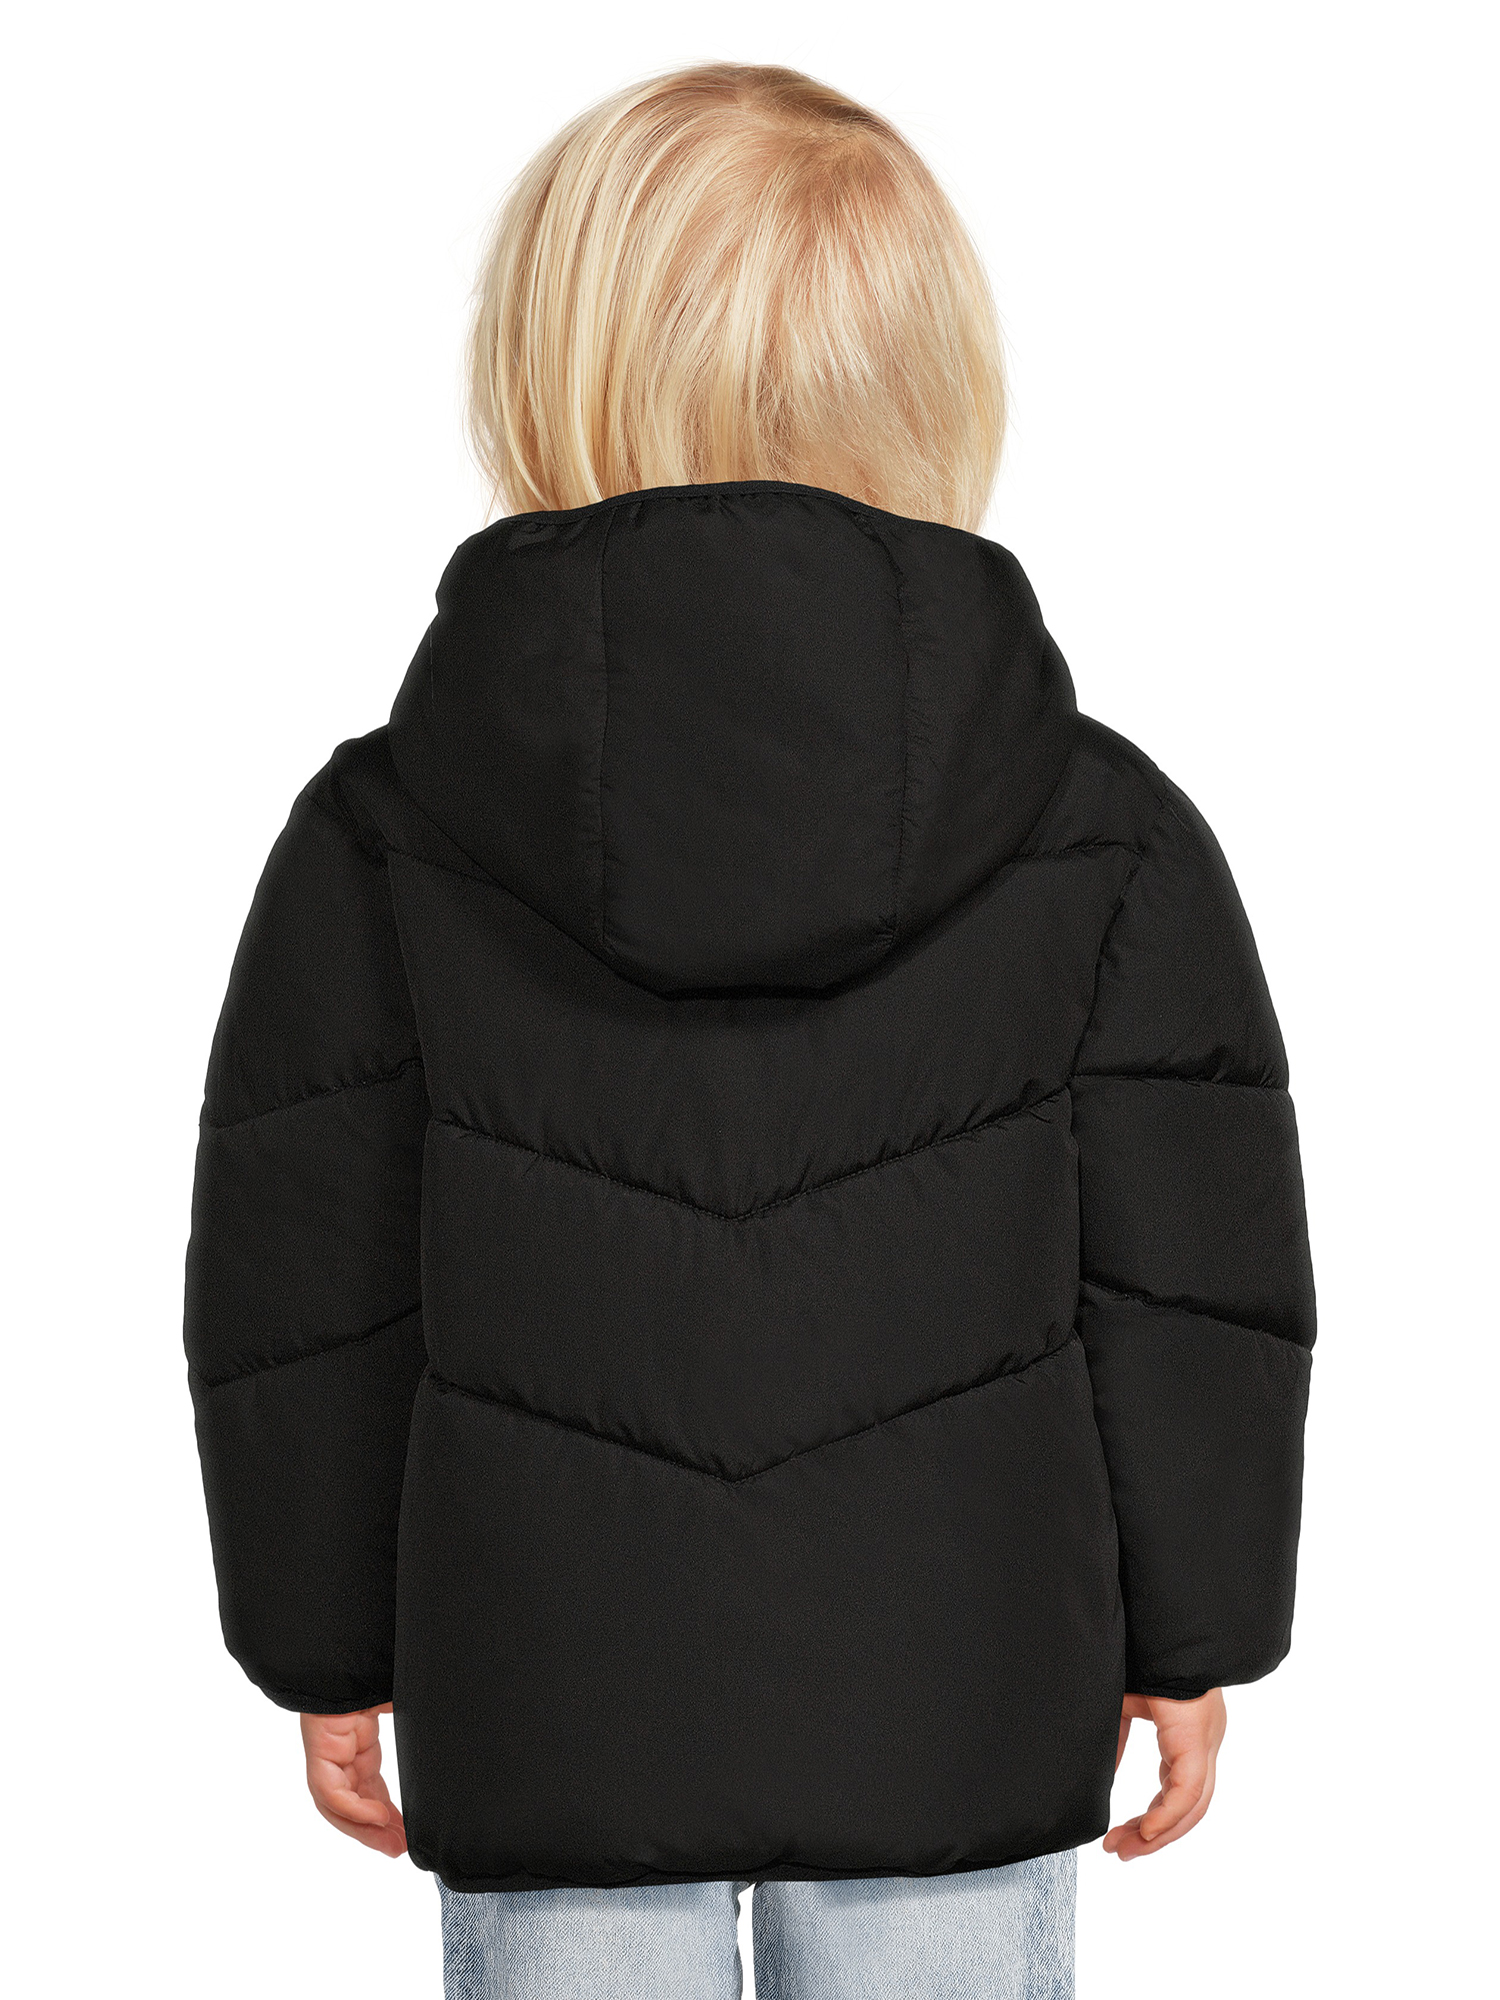 Swiss Tech Baby and Toddler Boy Heavyweight Puffer Jacket, Sizes 12M-5T - image 3 of 5